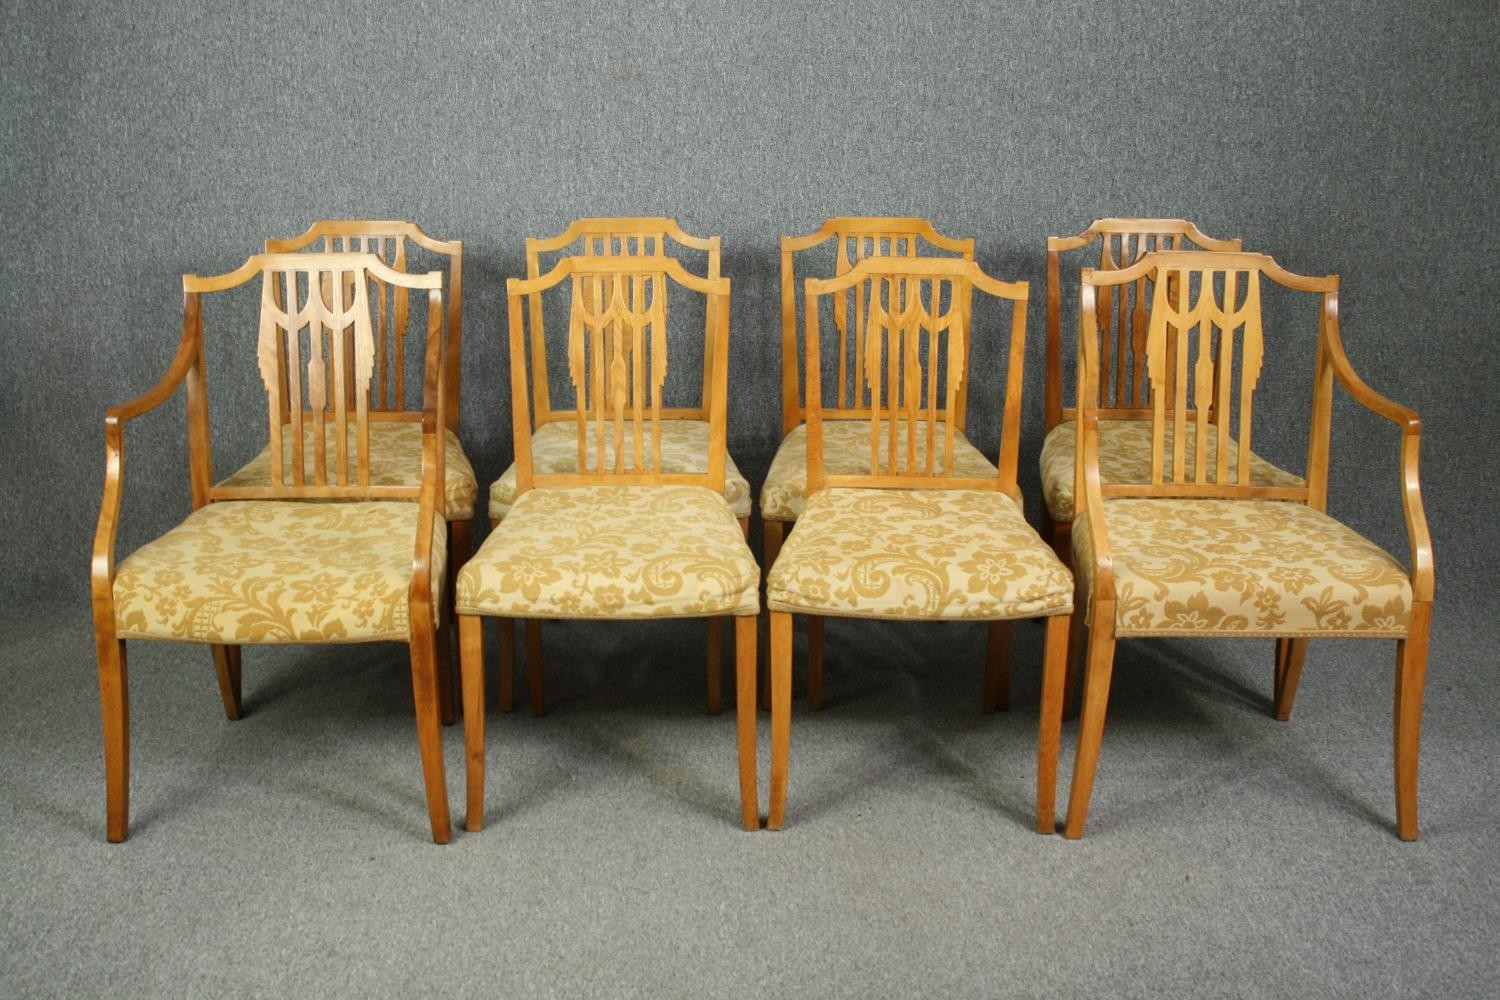 A set of eight Georgian style birch dining chairs to include two carver armchairs. (Repairs to the